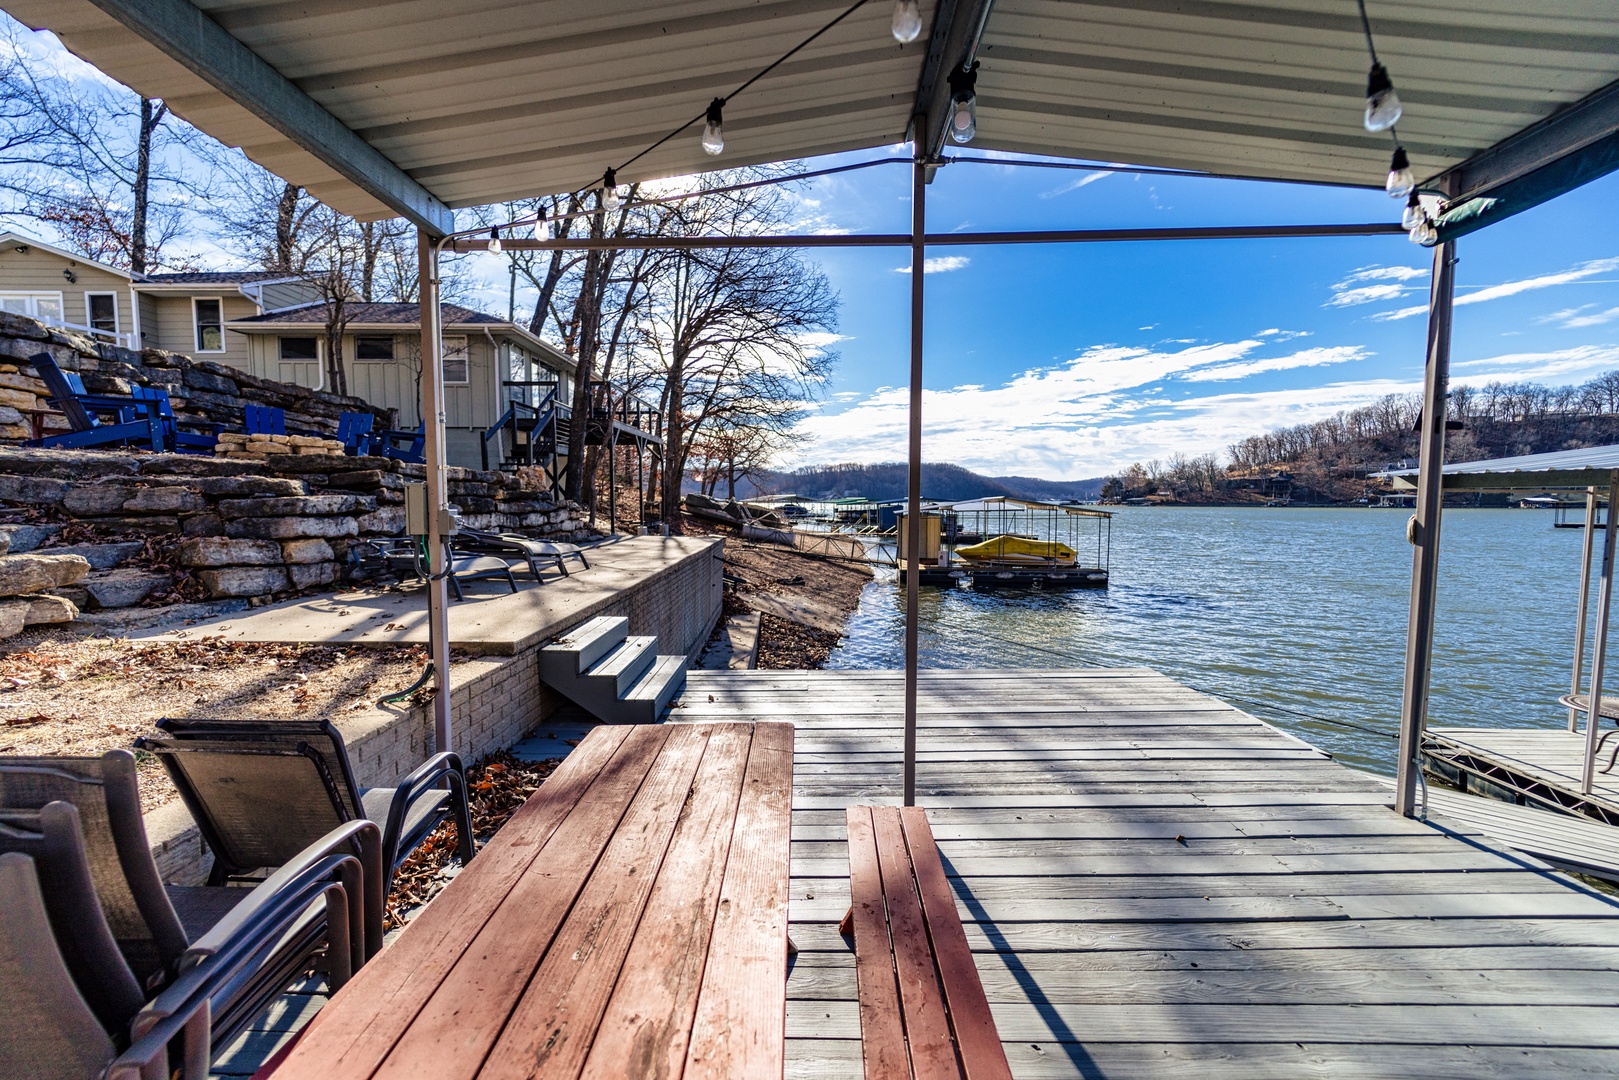 Sip morning coffee or grab a bite on the dock!